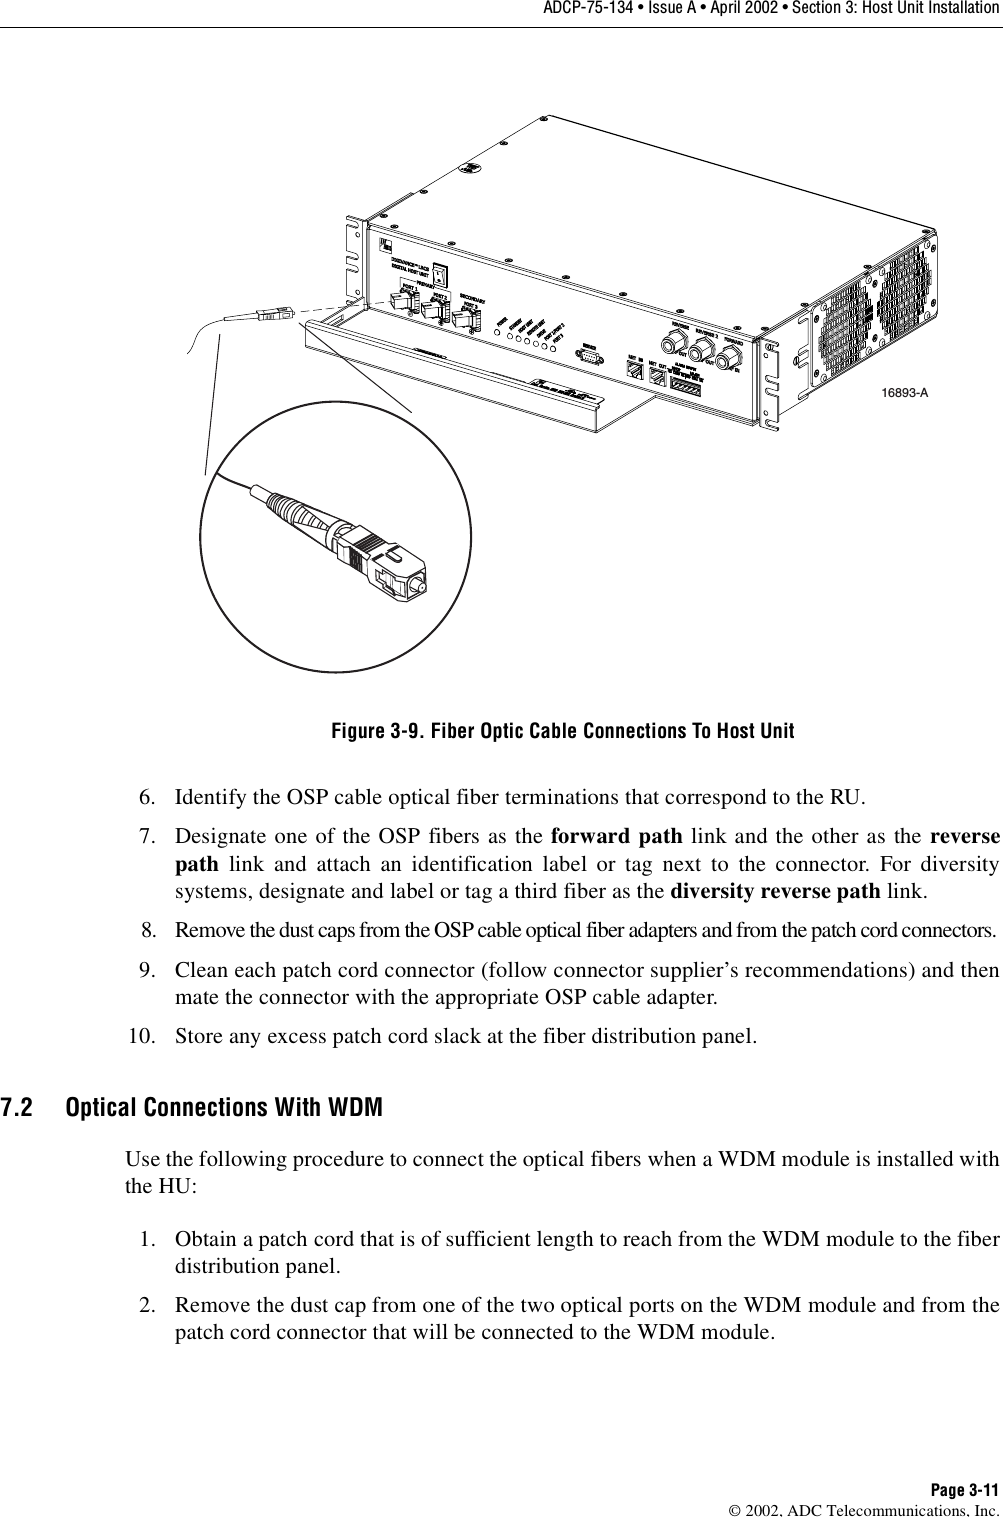 ADCP-75-134 • Issue A • April 2002 • Section 3: Host Unit InstallationPage 3-11©2002, ADC Telecommunications, Inc.Figure 3-9. Fiber Optic Cable Connections To Host Unit6. Identify the OSP cable optical fiber terminations that correspond to the RU.7. Designate one of the OSP fibers as the forward path link and the other as the reversepath link and attach an identification label or tag next to the connector. For diversitysystems, designate and label or tag athird fiber as the diversity reverse path link.8. Remove the dust caps from the OSP cable optical fiber adapters and from the patch cord connectors.9. Clean each patch cord connector (follow connector supplier’s recommendations) and thenmate the connector with the appropriate OSP cable adapter.10. Store any excess patch cord slack at the fiber distribution panel.7.2 Optical Connections With WDMUse the following procedure to connect the optical fibers when aWDM module is installed withthe HU:1. Obtain apatch cord that is of sufficient length to reach from the WDM module to the fiberdistribution panel.2. Remove the dust cap from one of the two optical ports on the WDM module and from thepatch cord connector that will be connected to the WDM module.16893-A